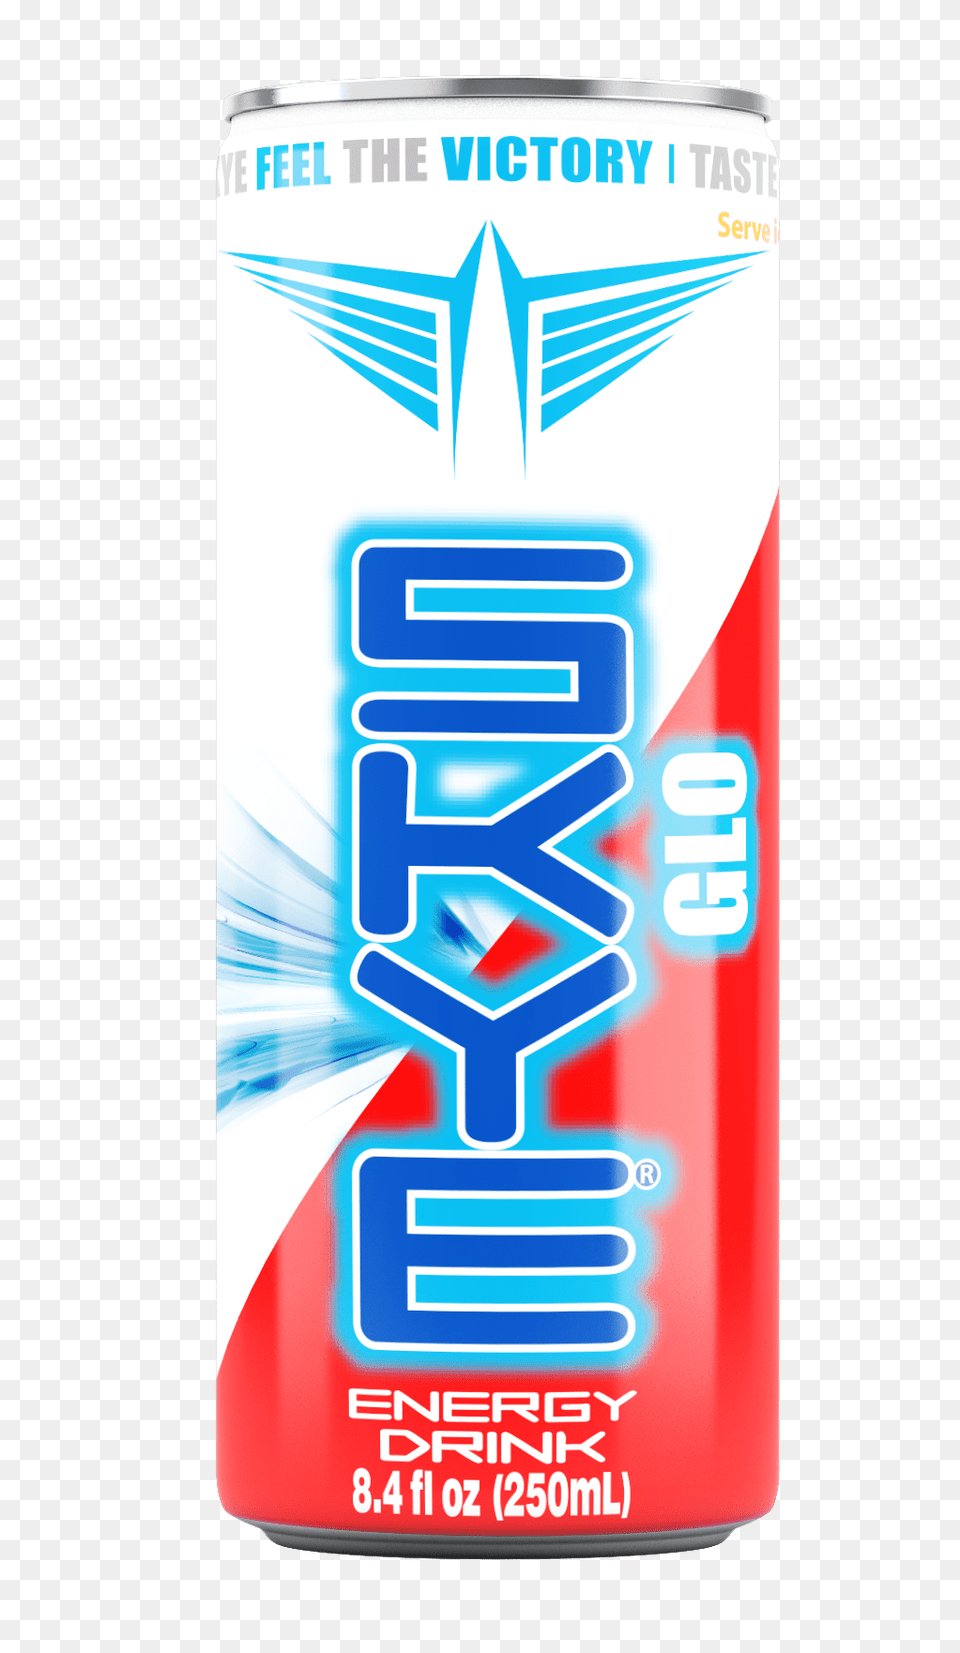 Skye Energy Drink Glo Skye Energy Drink, Can, Tin Free Transparent Png